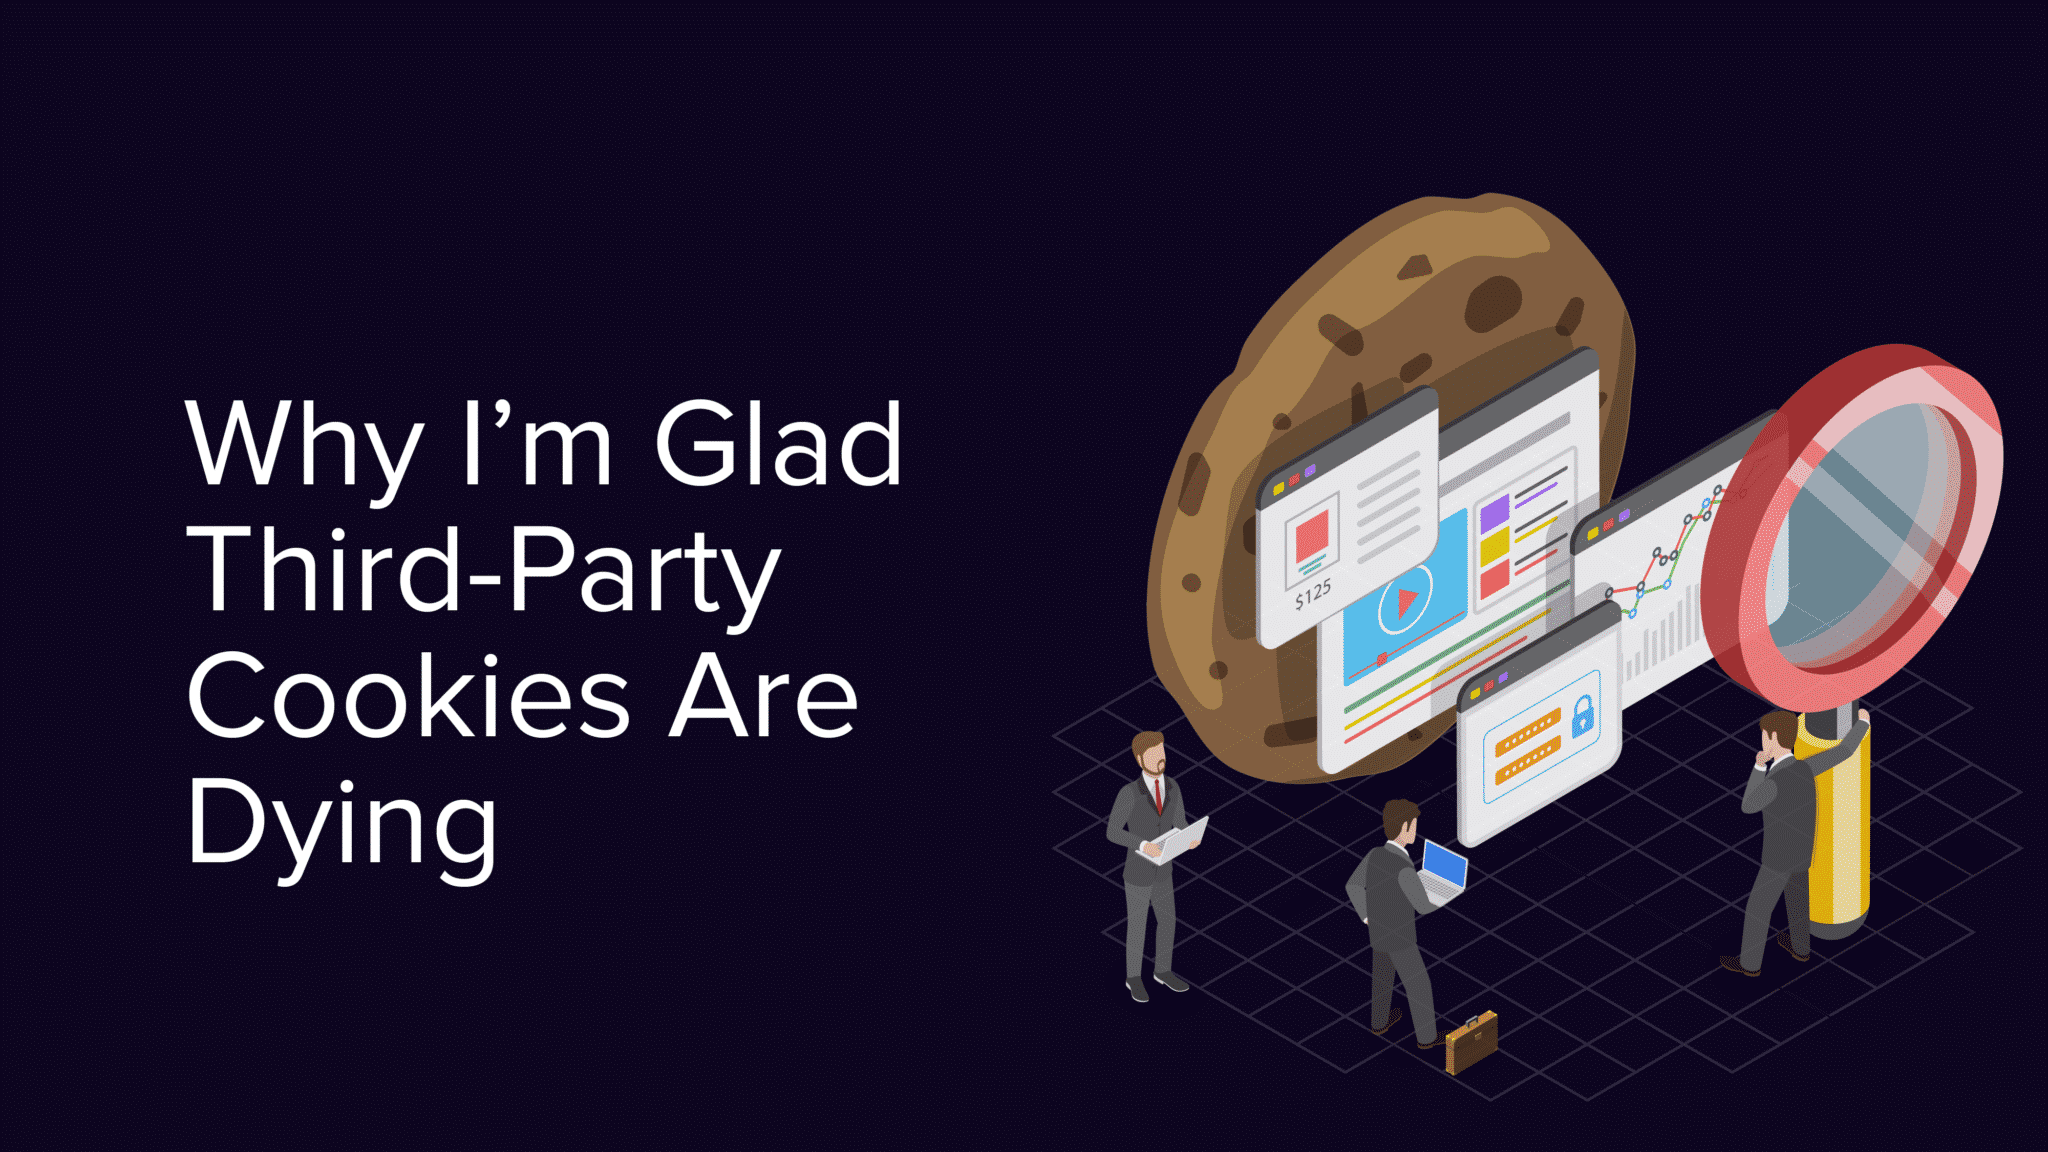 Why I'm glad third-party cookies are dying